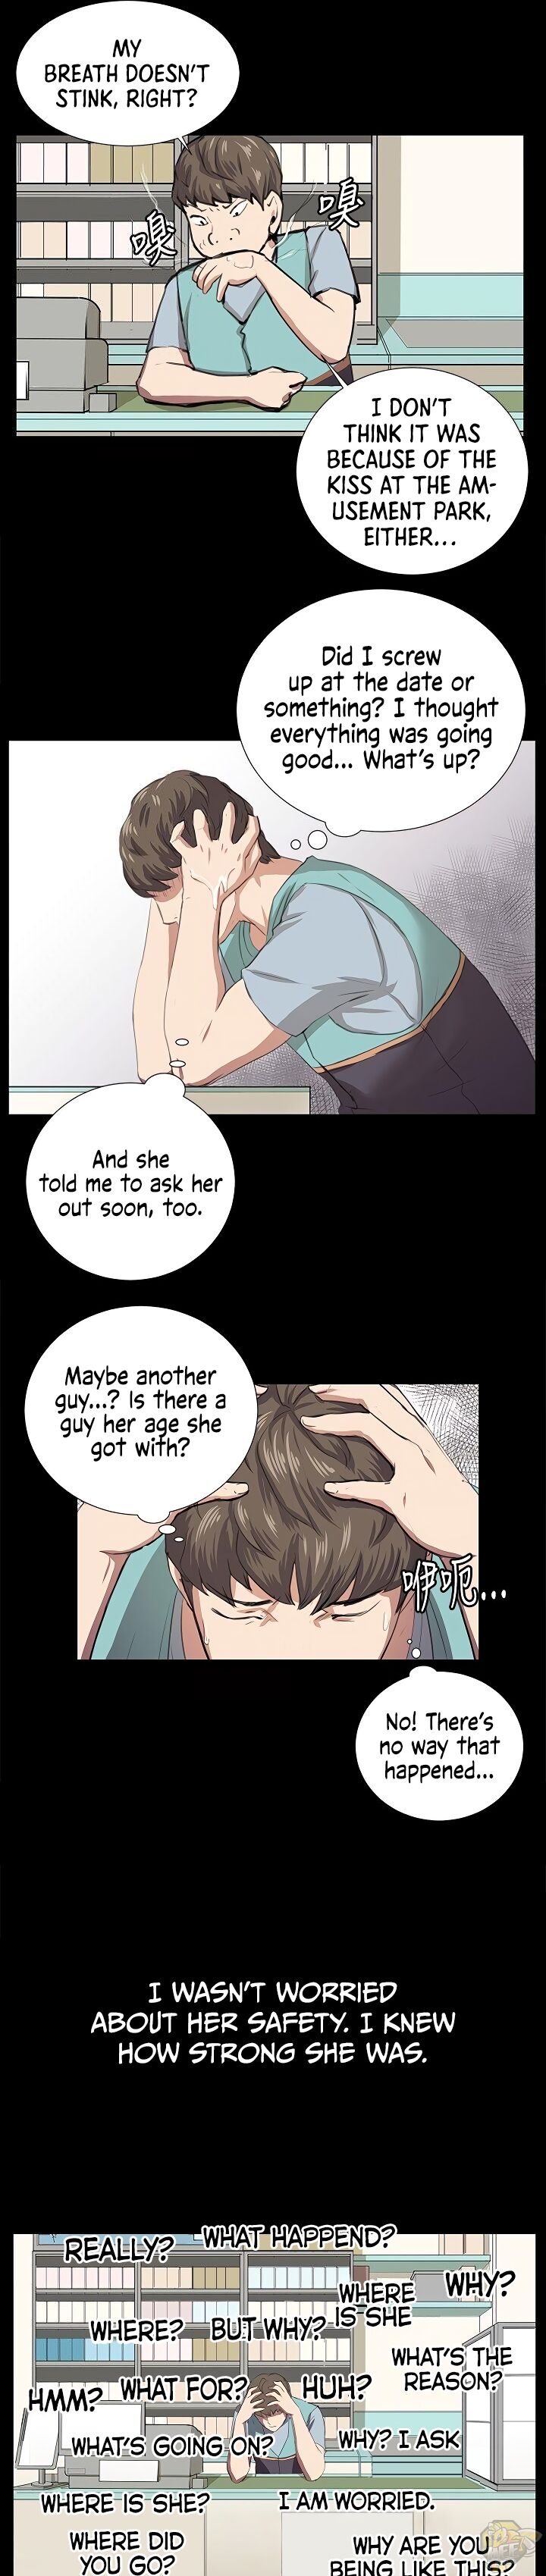 She’s too much for Me Chapter 59 - HolyManga.net